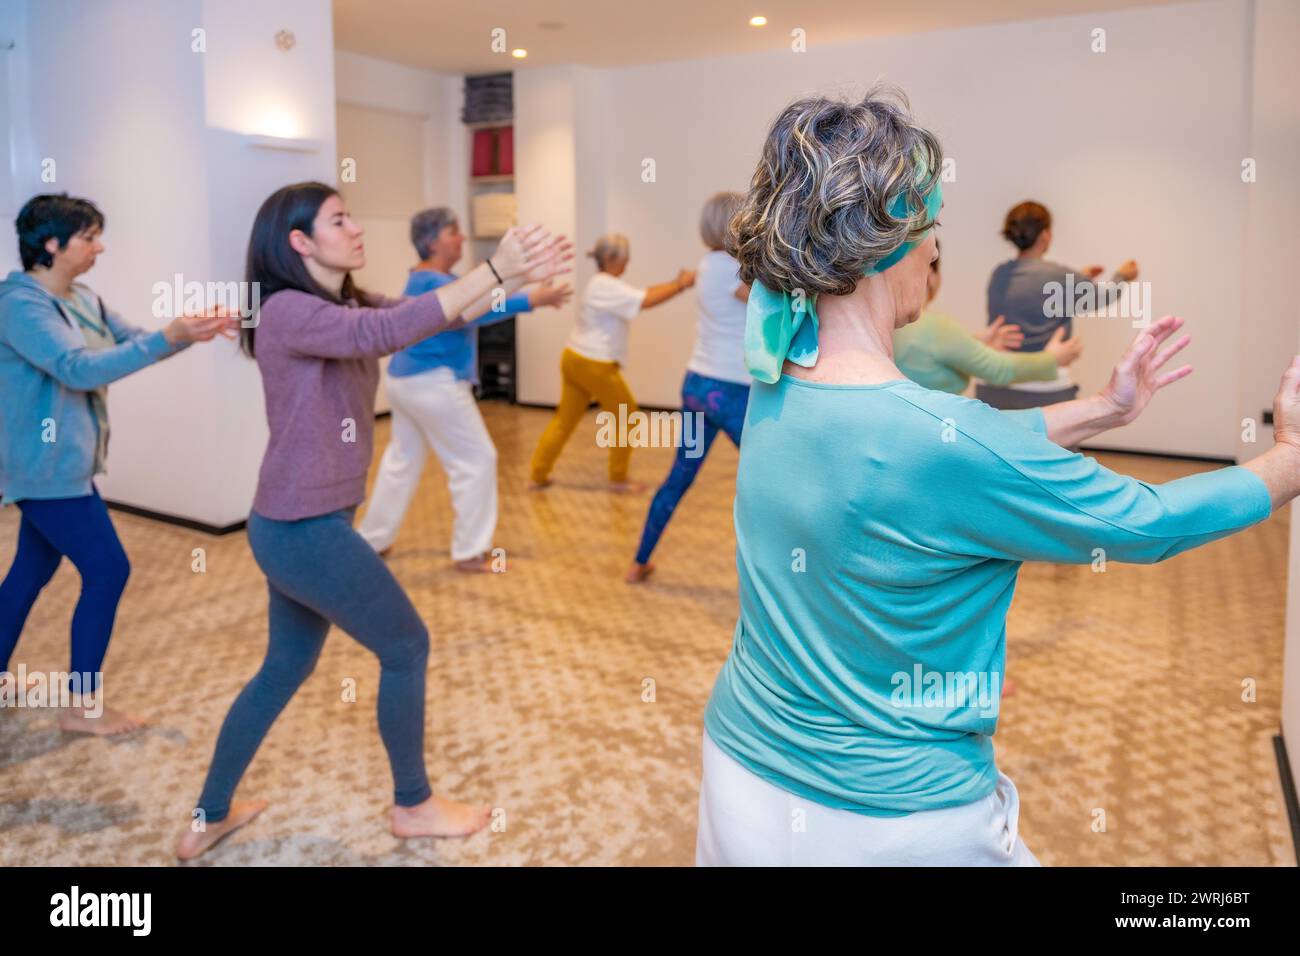 Group of women simulating waves in a choreographed Qi Gong exercise in a classroom Stock Photo